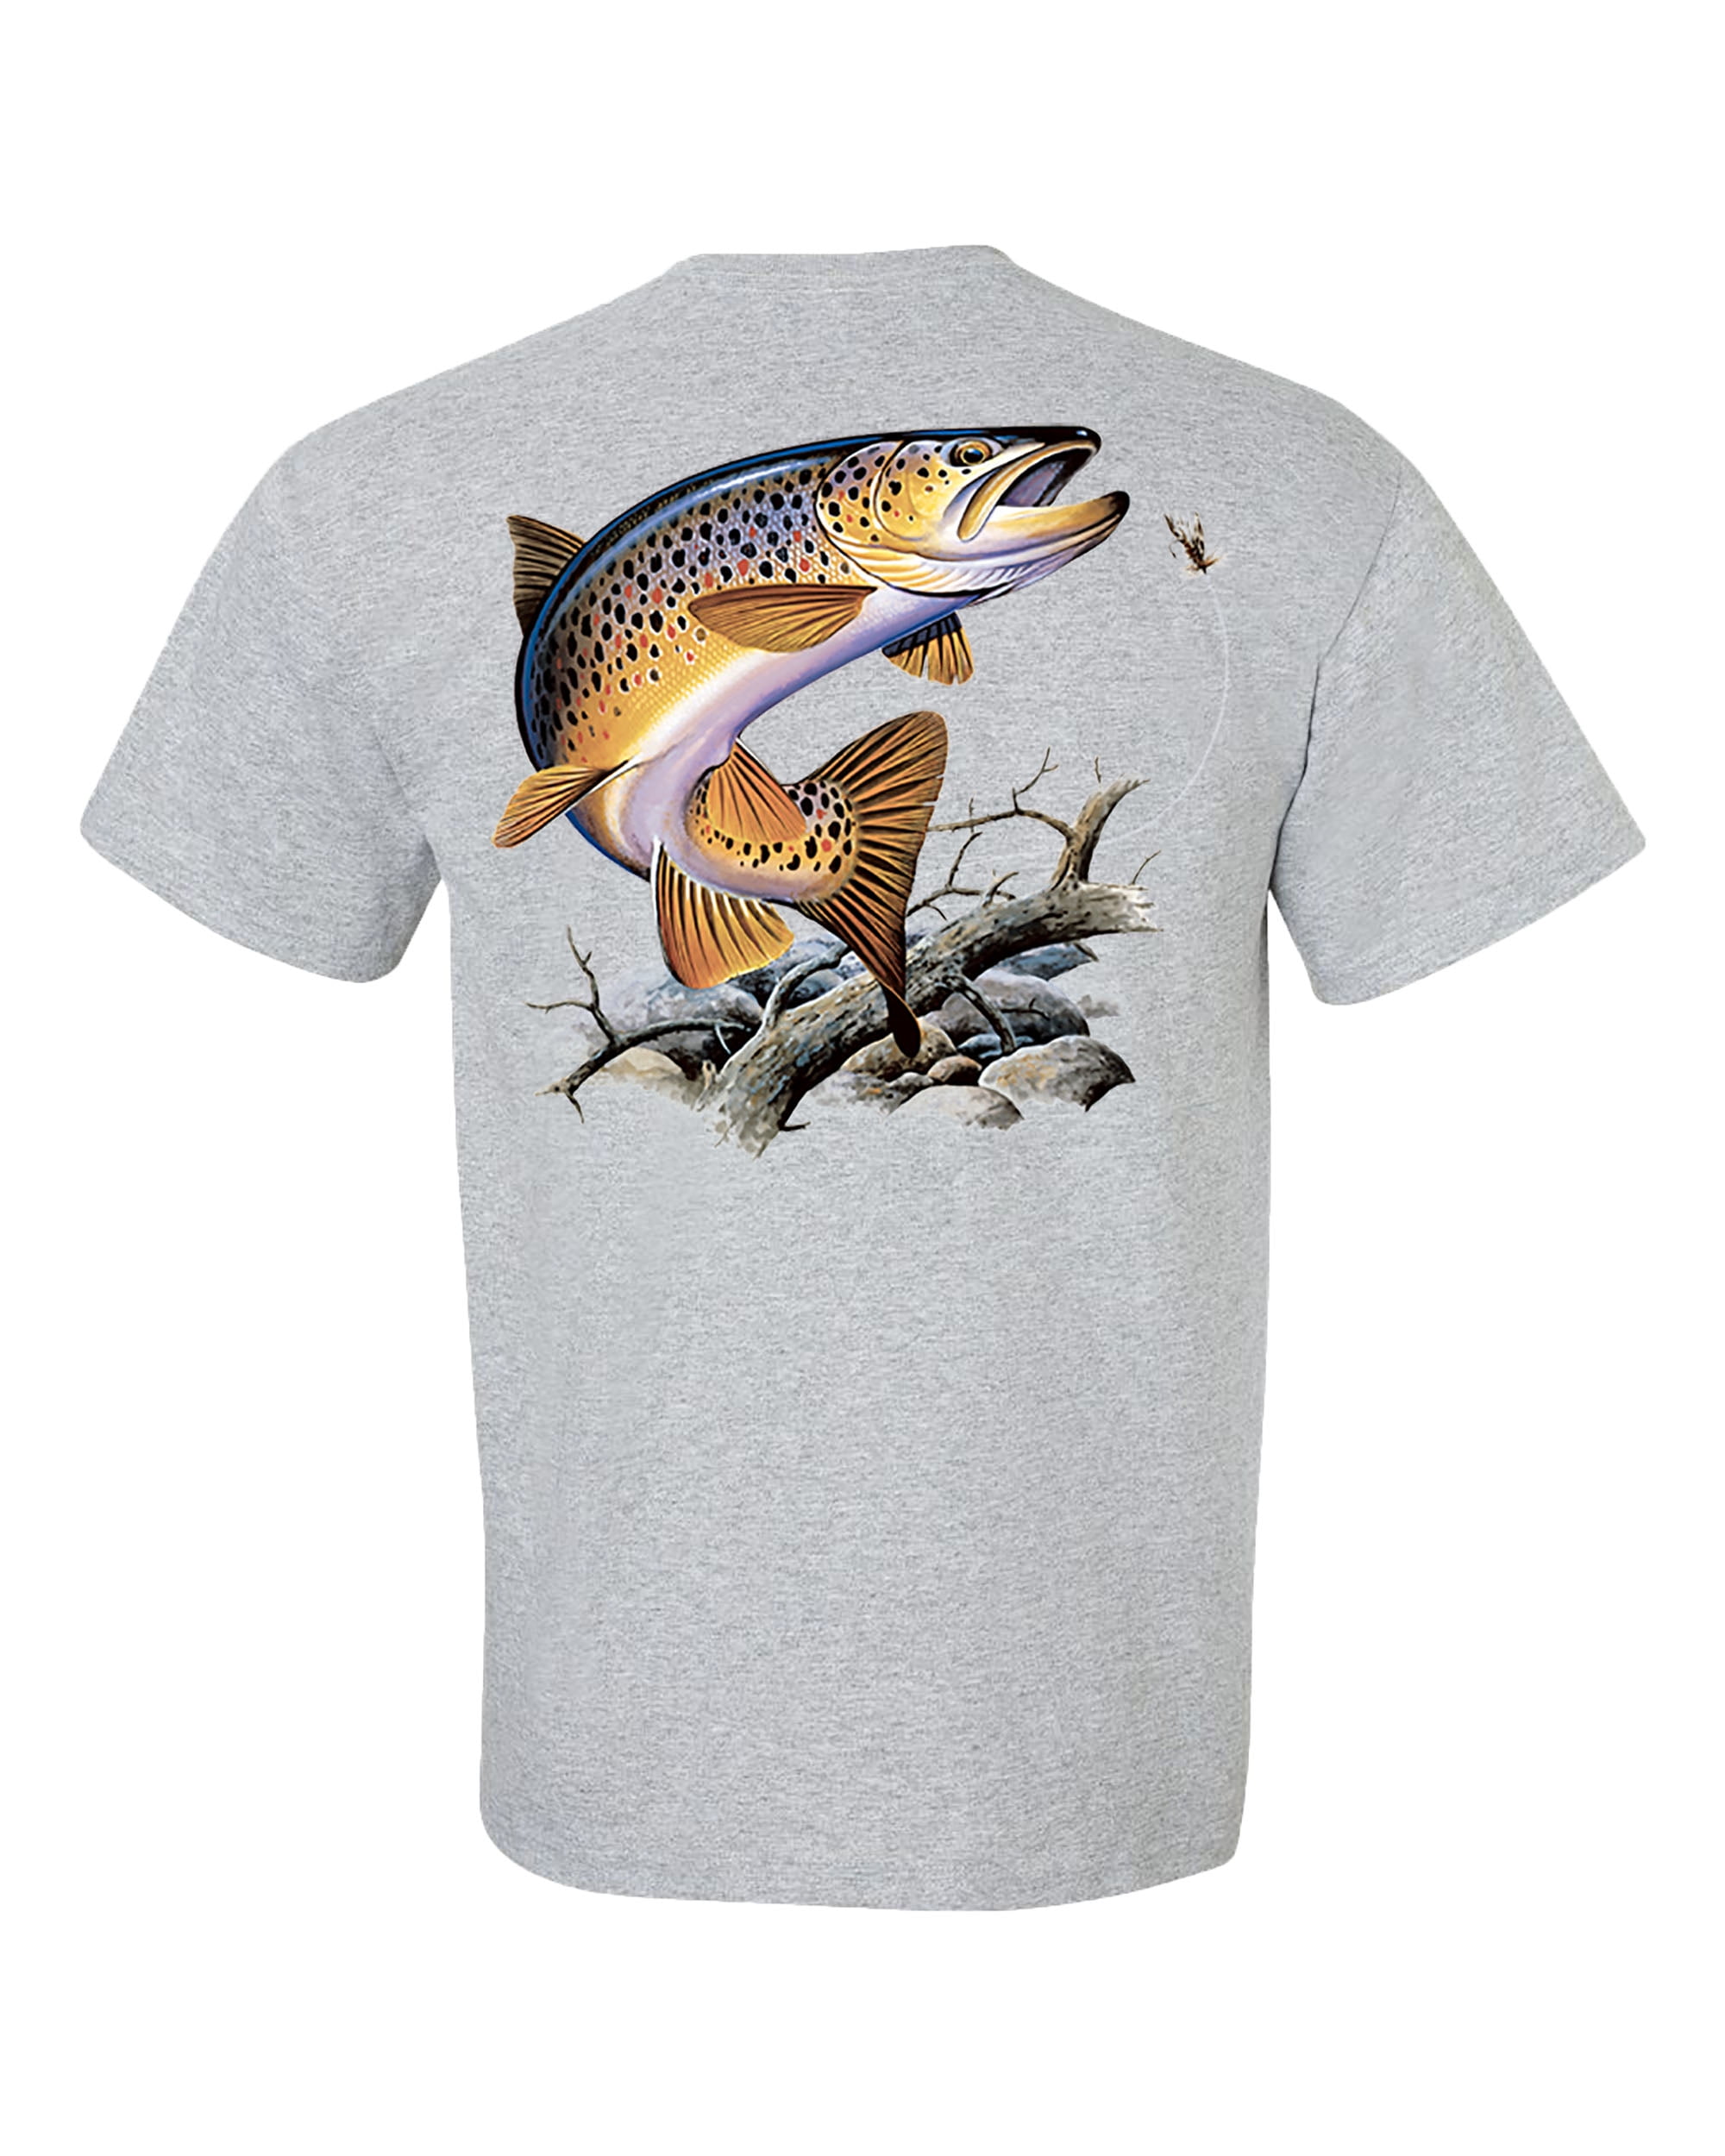 Fishing Brown Trout Adult Short Sleeve T-Shirt-Sports Gray-Small